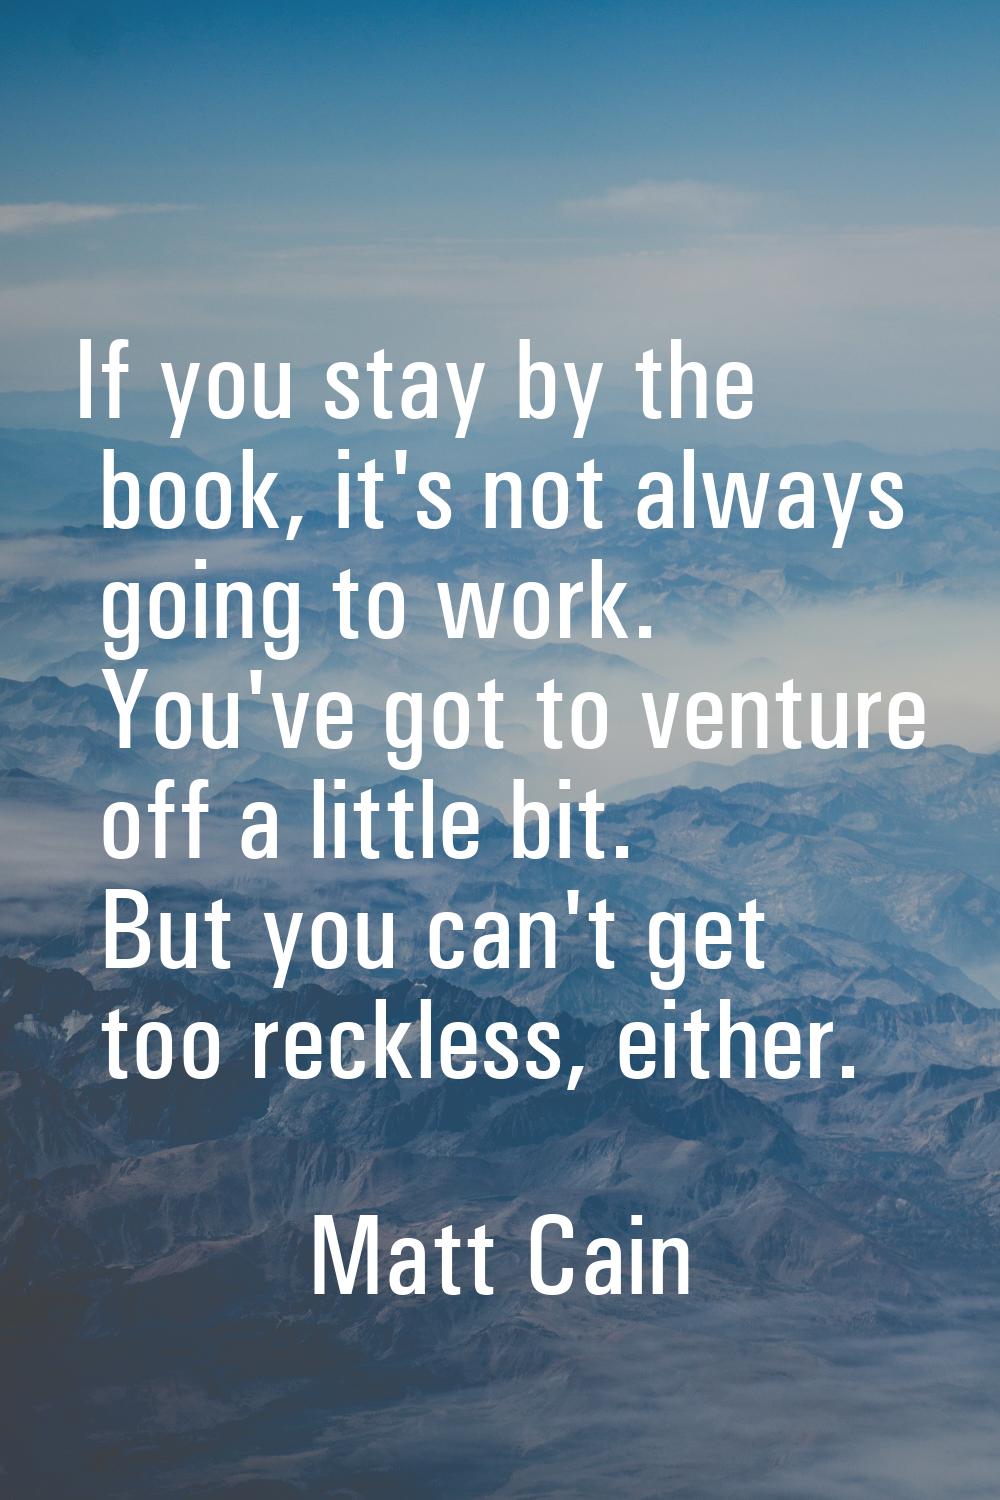 If you stay by the book, it's not always going to work. You've got to venture off a little bit. But